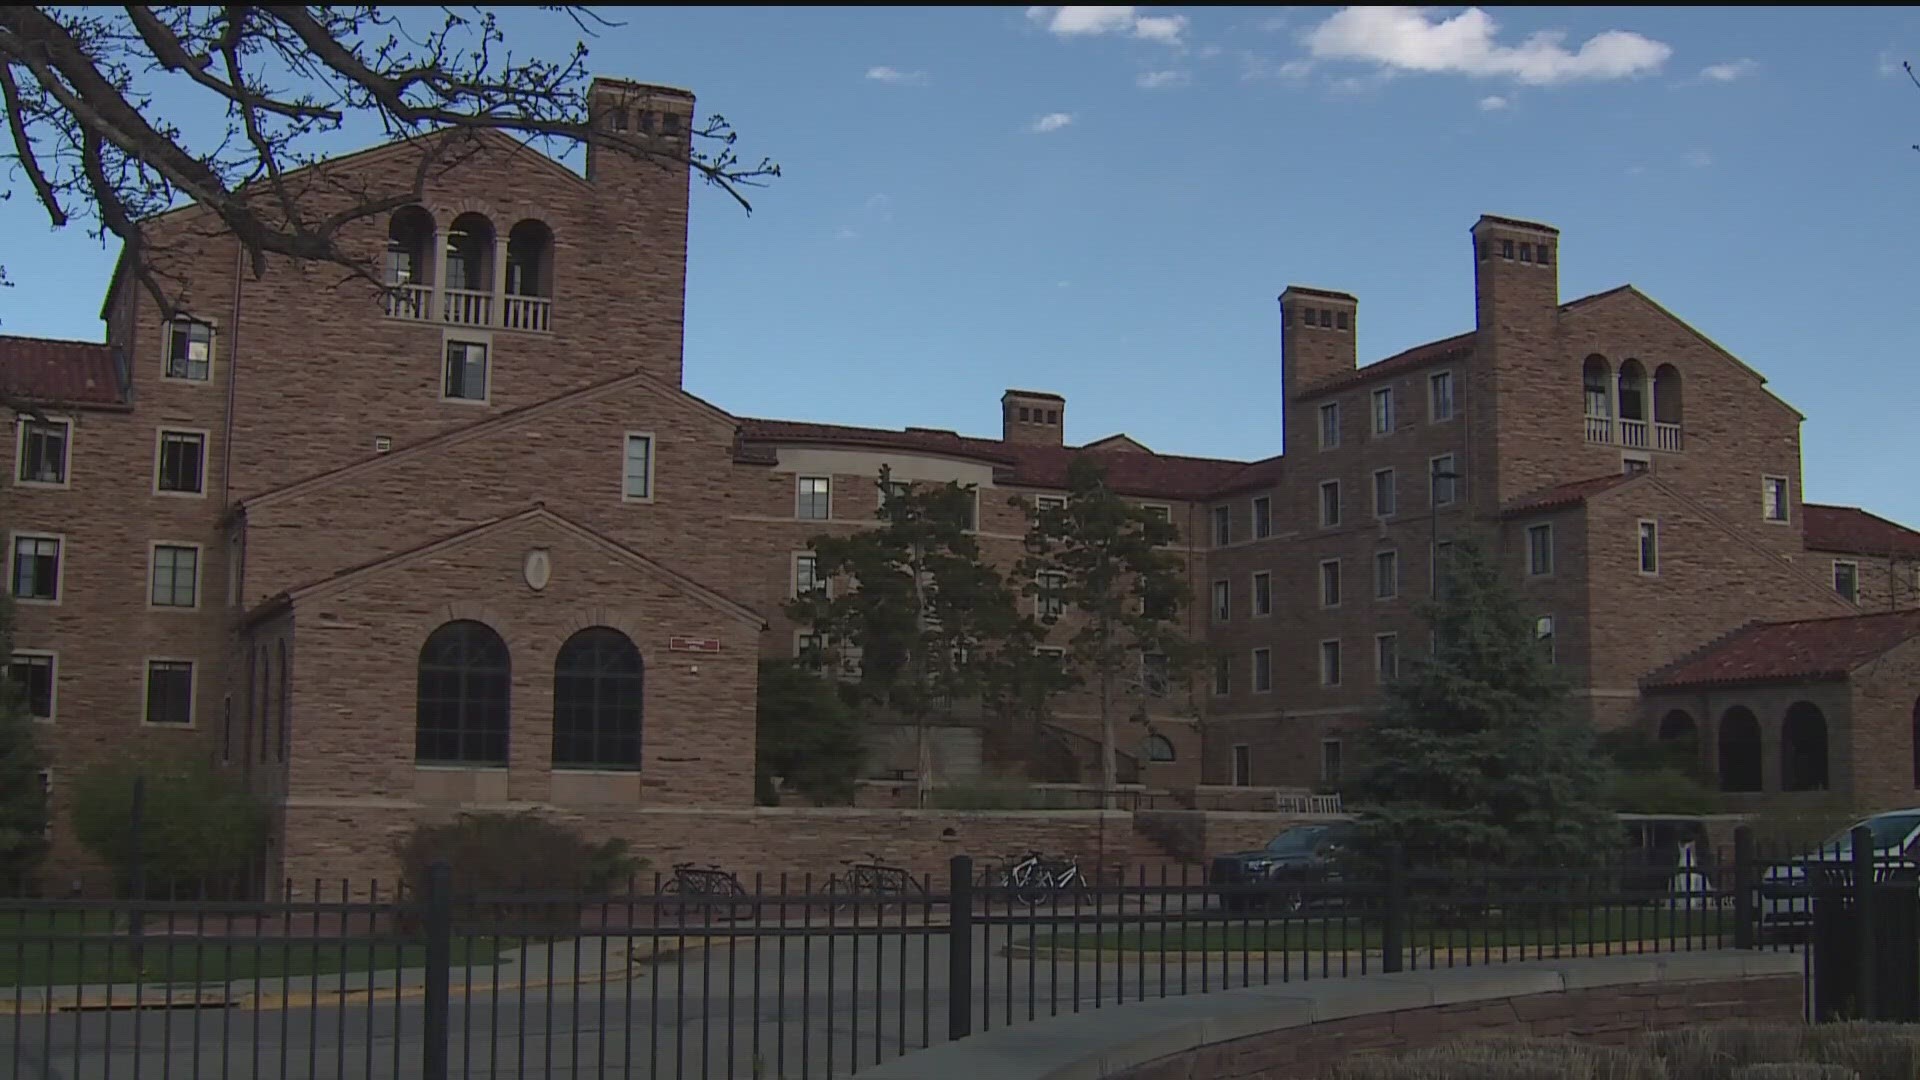 The first of thousands of students will make their way to their new homes Monday on the CU Boulder campus.